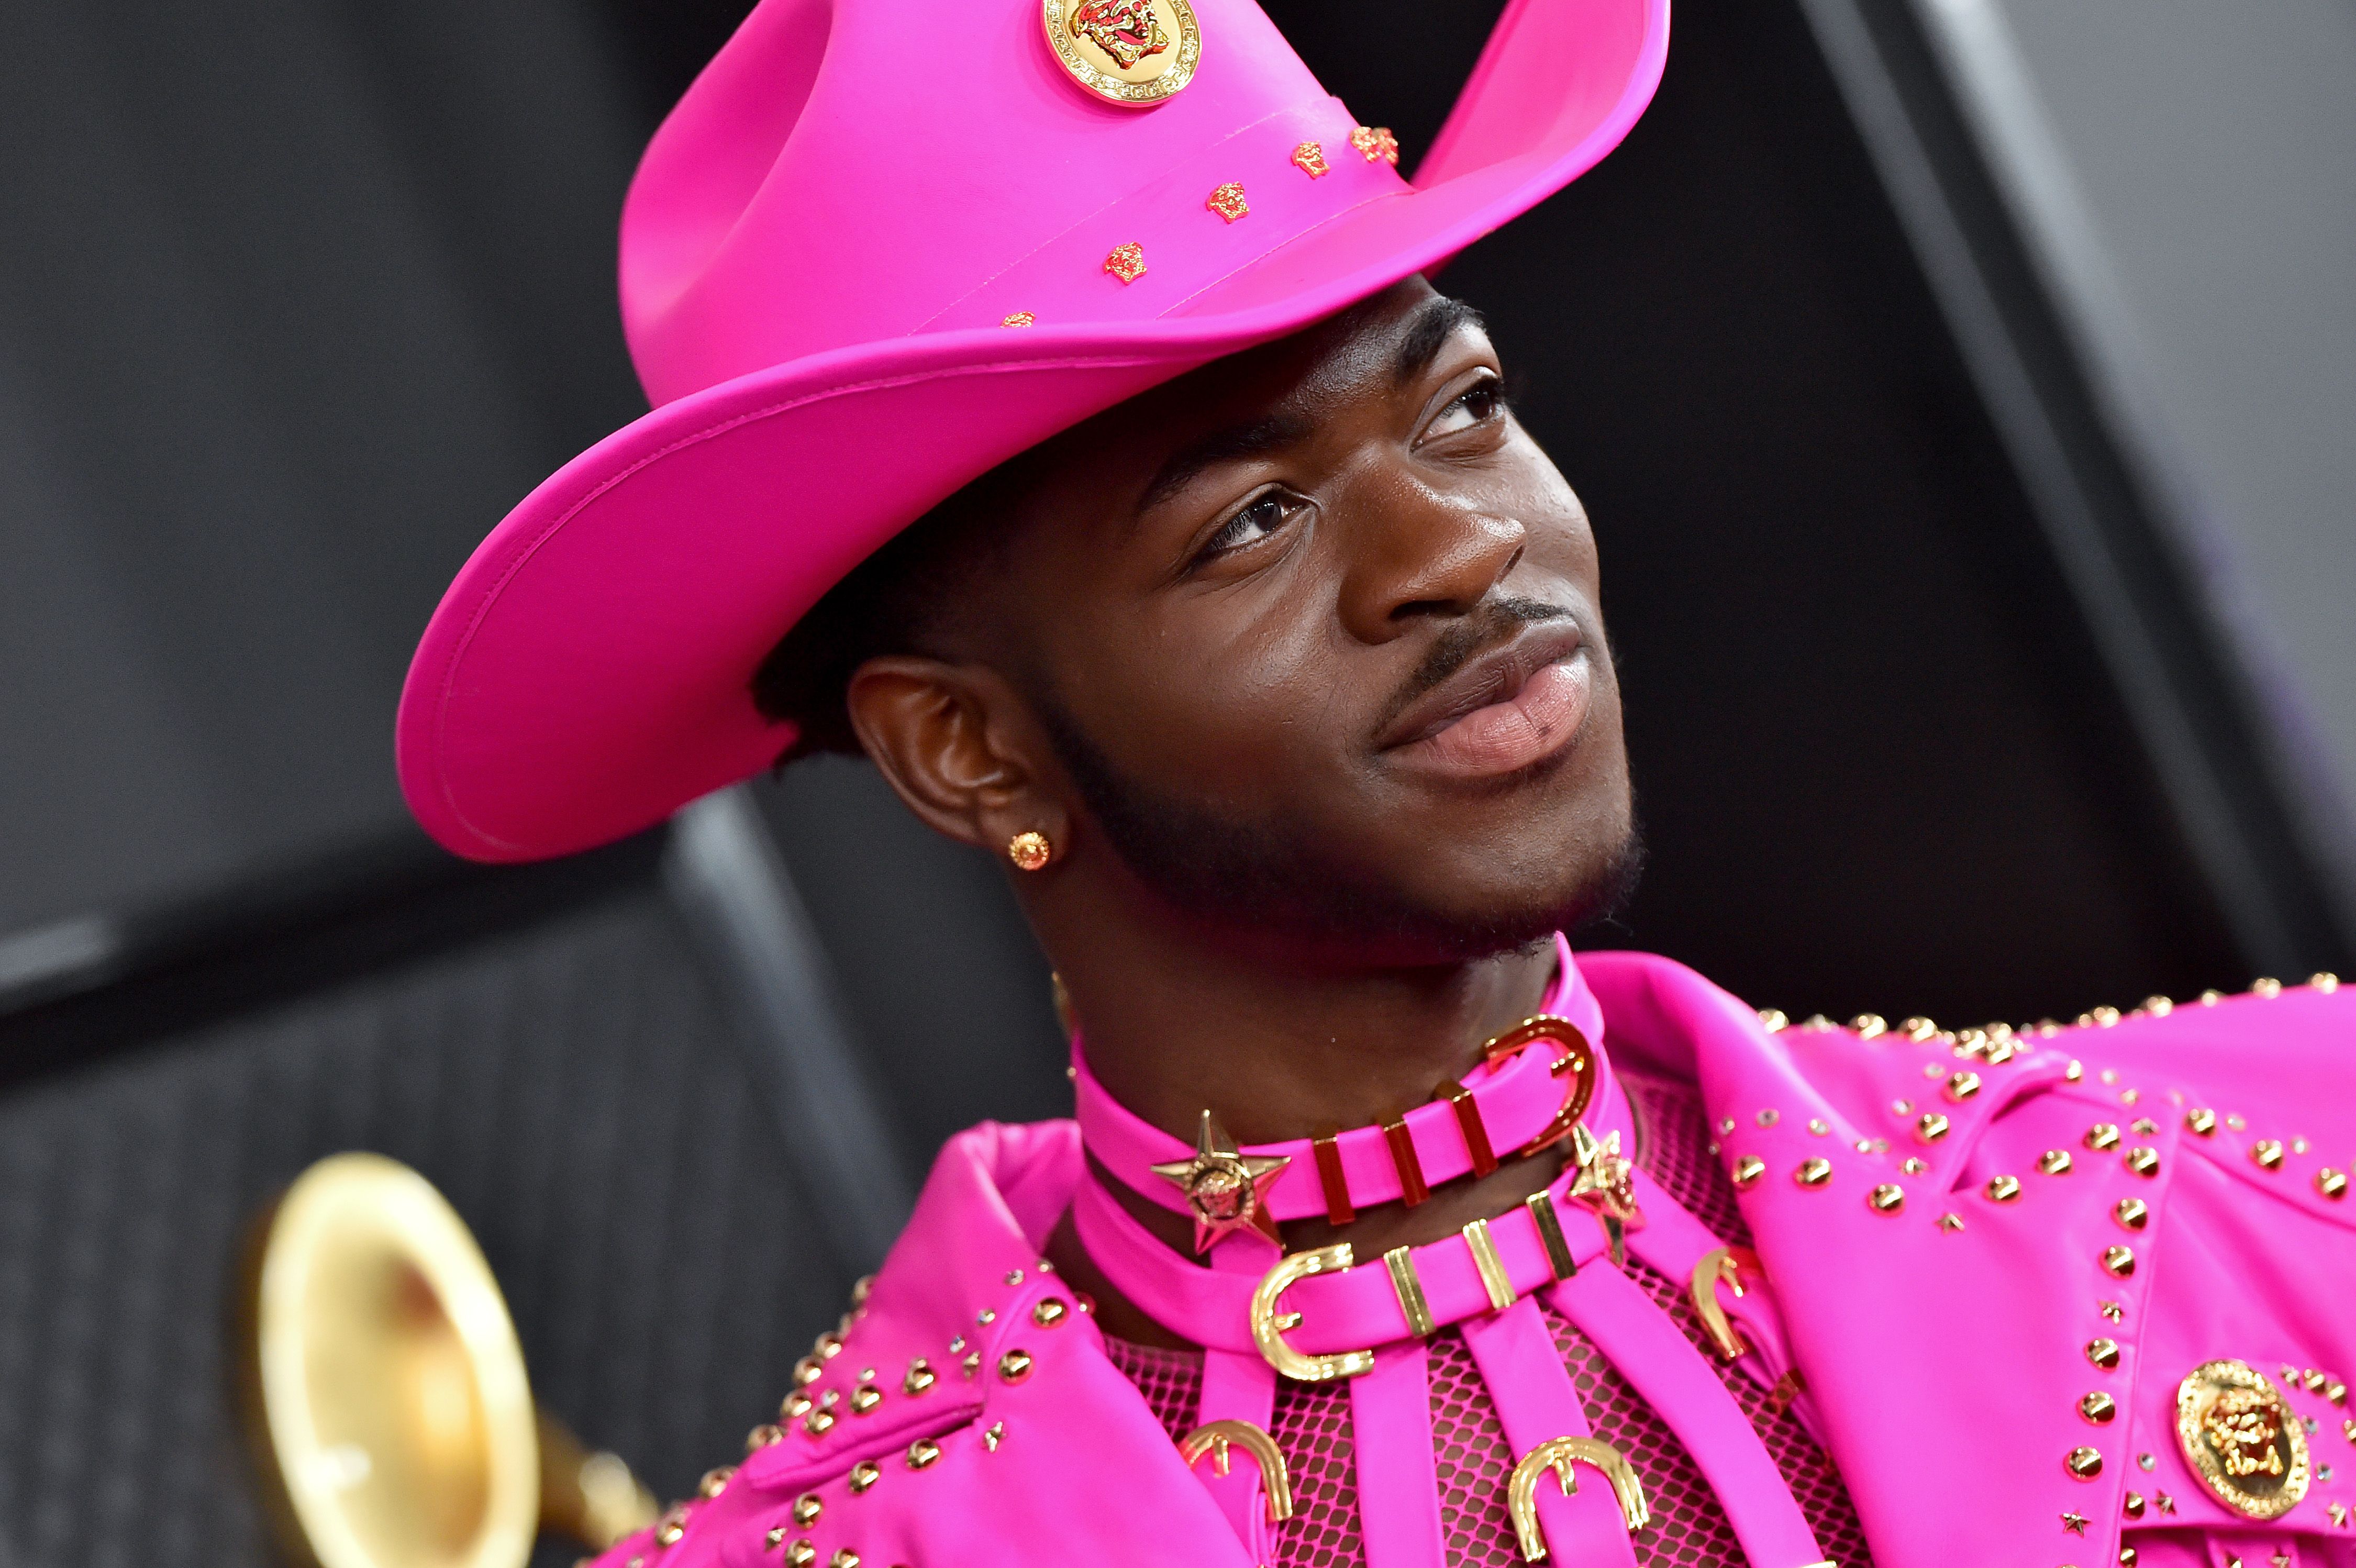 Little Sax Girl Free Video - Lil Nas X's Best Outfits - Lil Nas X Fashion Photos